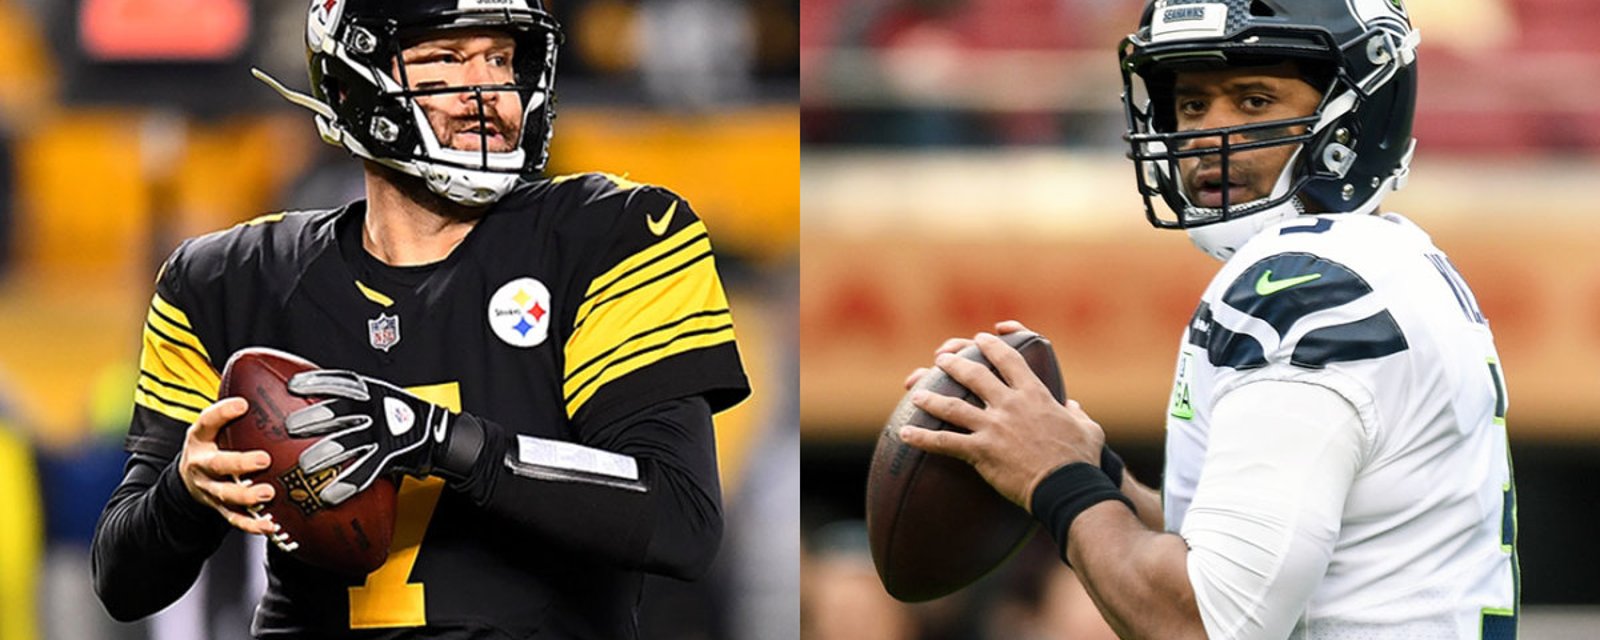 Russell Wilson compared to Steelers legend Ben Roethlisberger